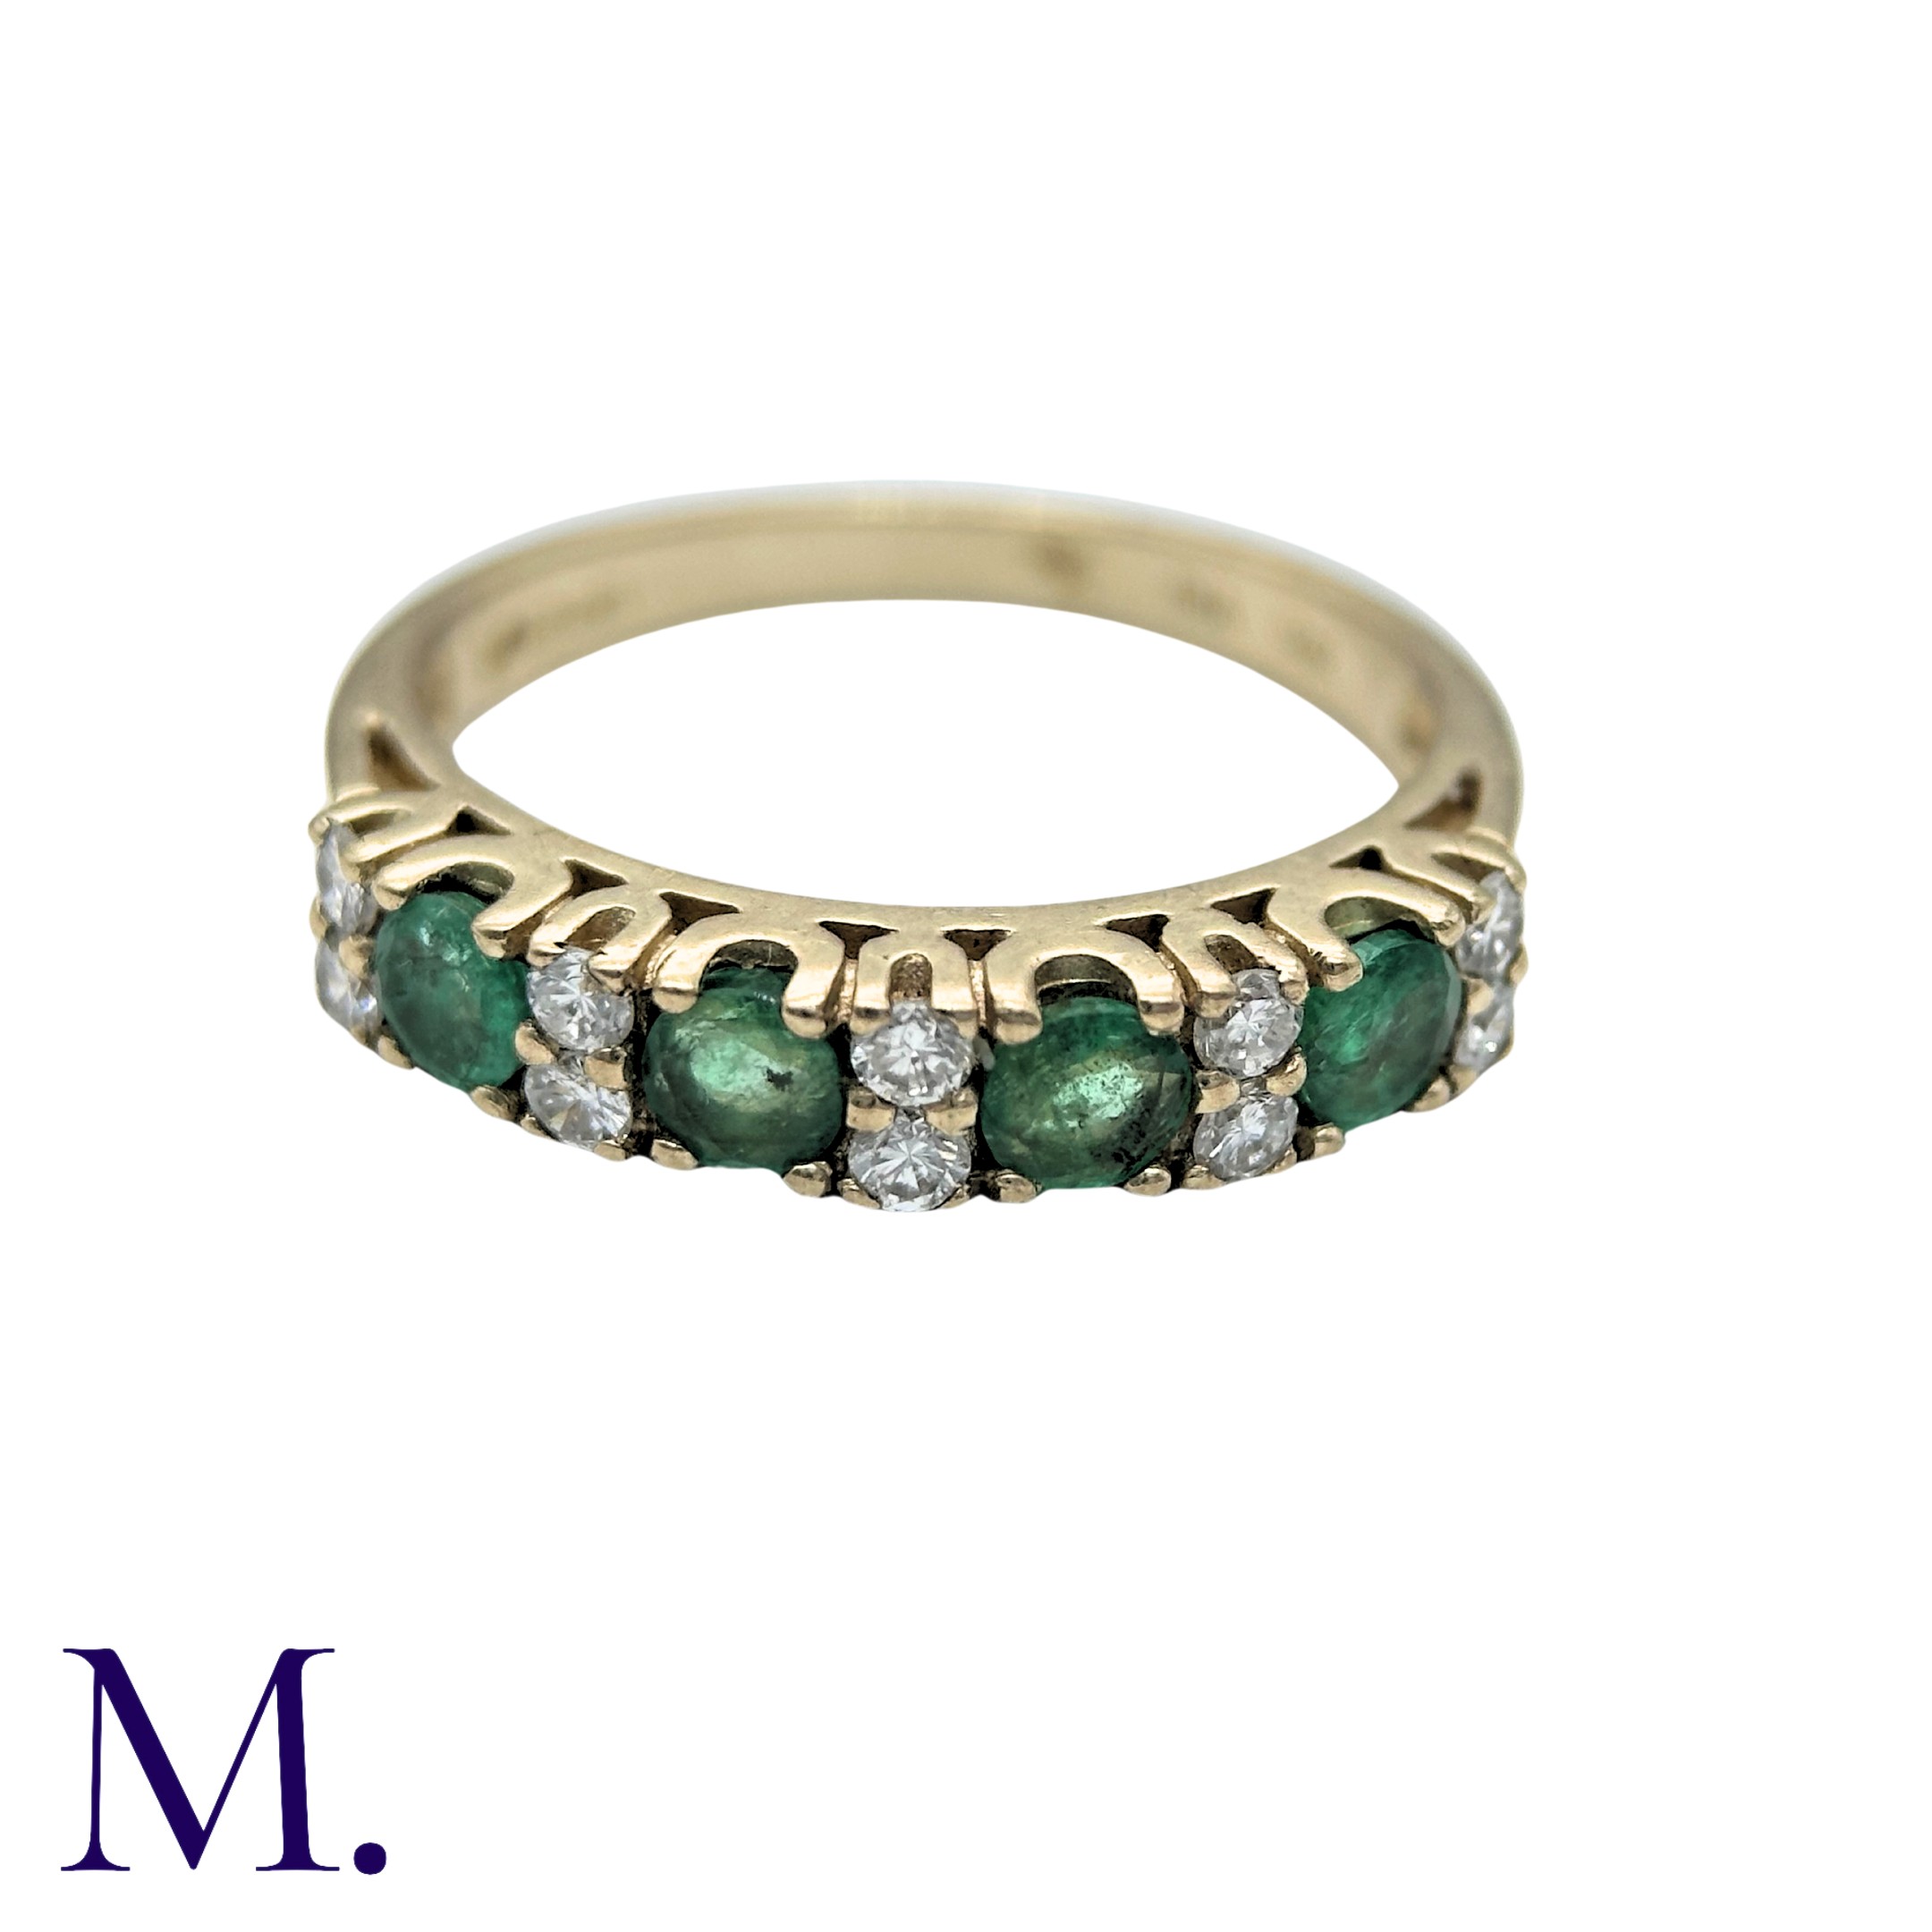 An Emerald And Diamond Ring in 9k yellow gold, set with four round cut emeralds punctuated with - Image 2 of 6